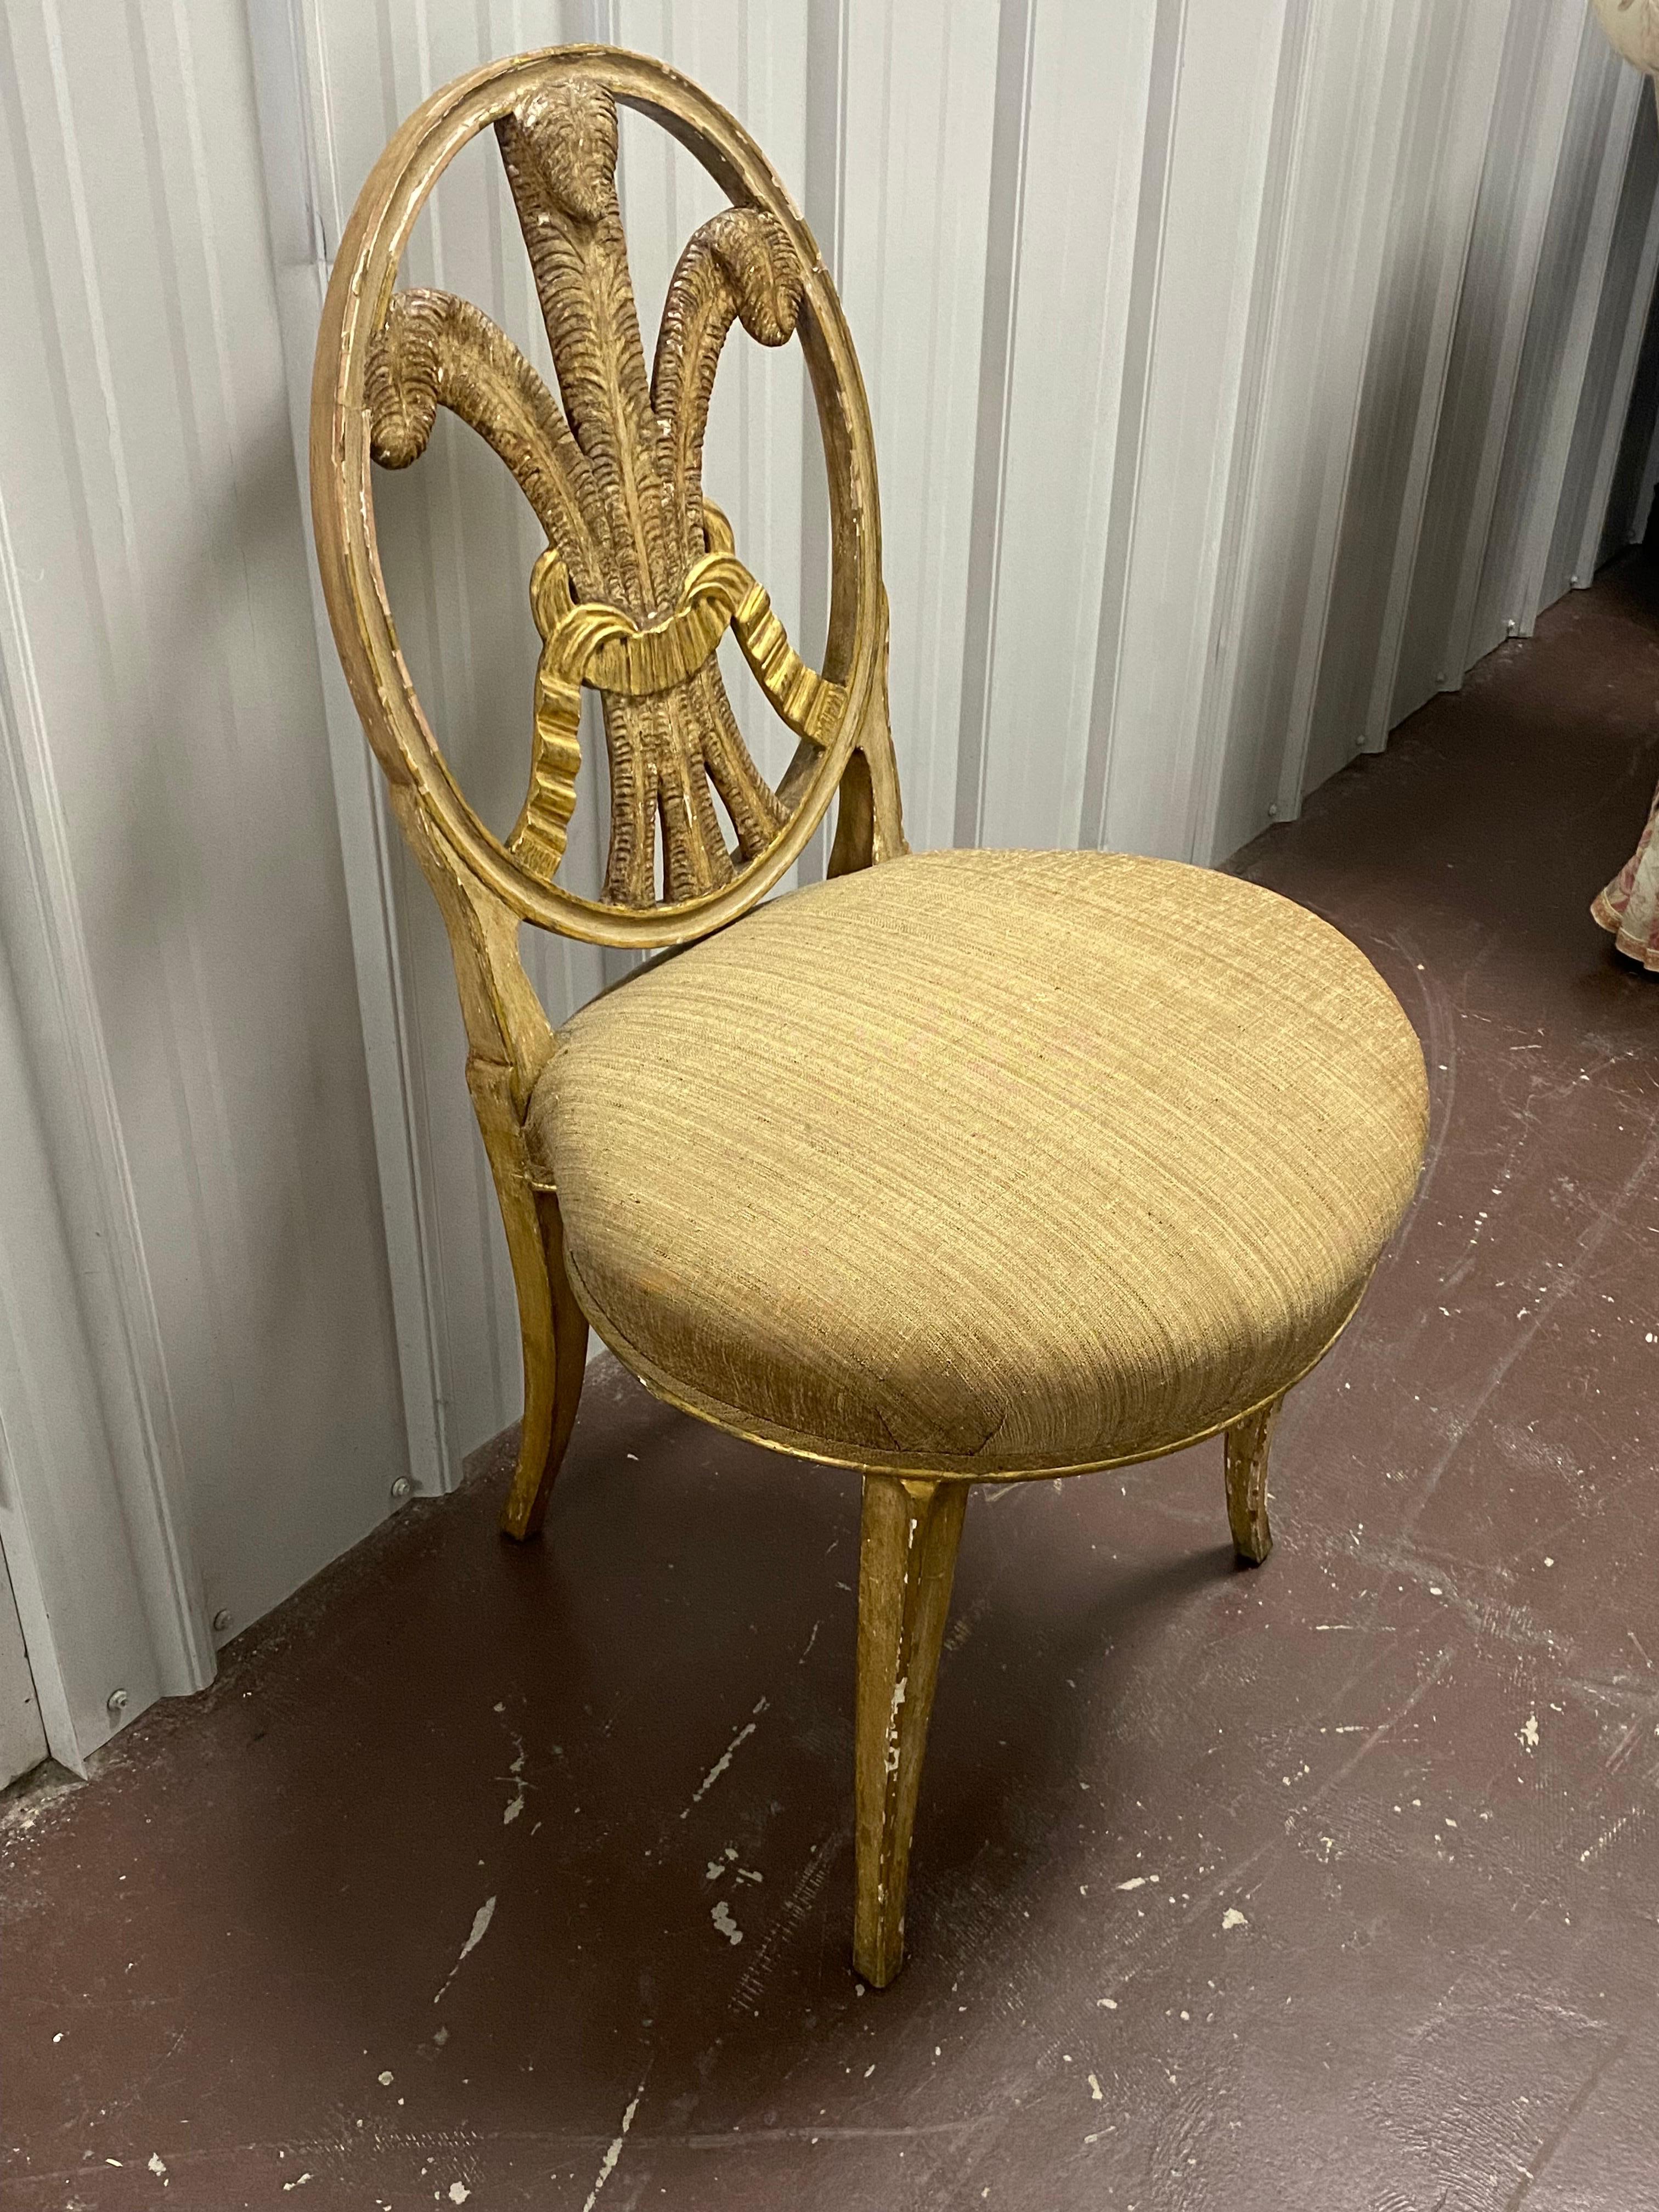 Late 18th c. English Hepplewhite Prince of Wales Parcel-Gilt Side Chair. 
A charming Hepplewhite English Chair in Paint and Parcel-gilt. Prince of Wales plumes seat back with gilded ribbon detail. A rare oval shaped seat covered in a striae plaid